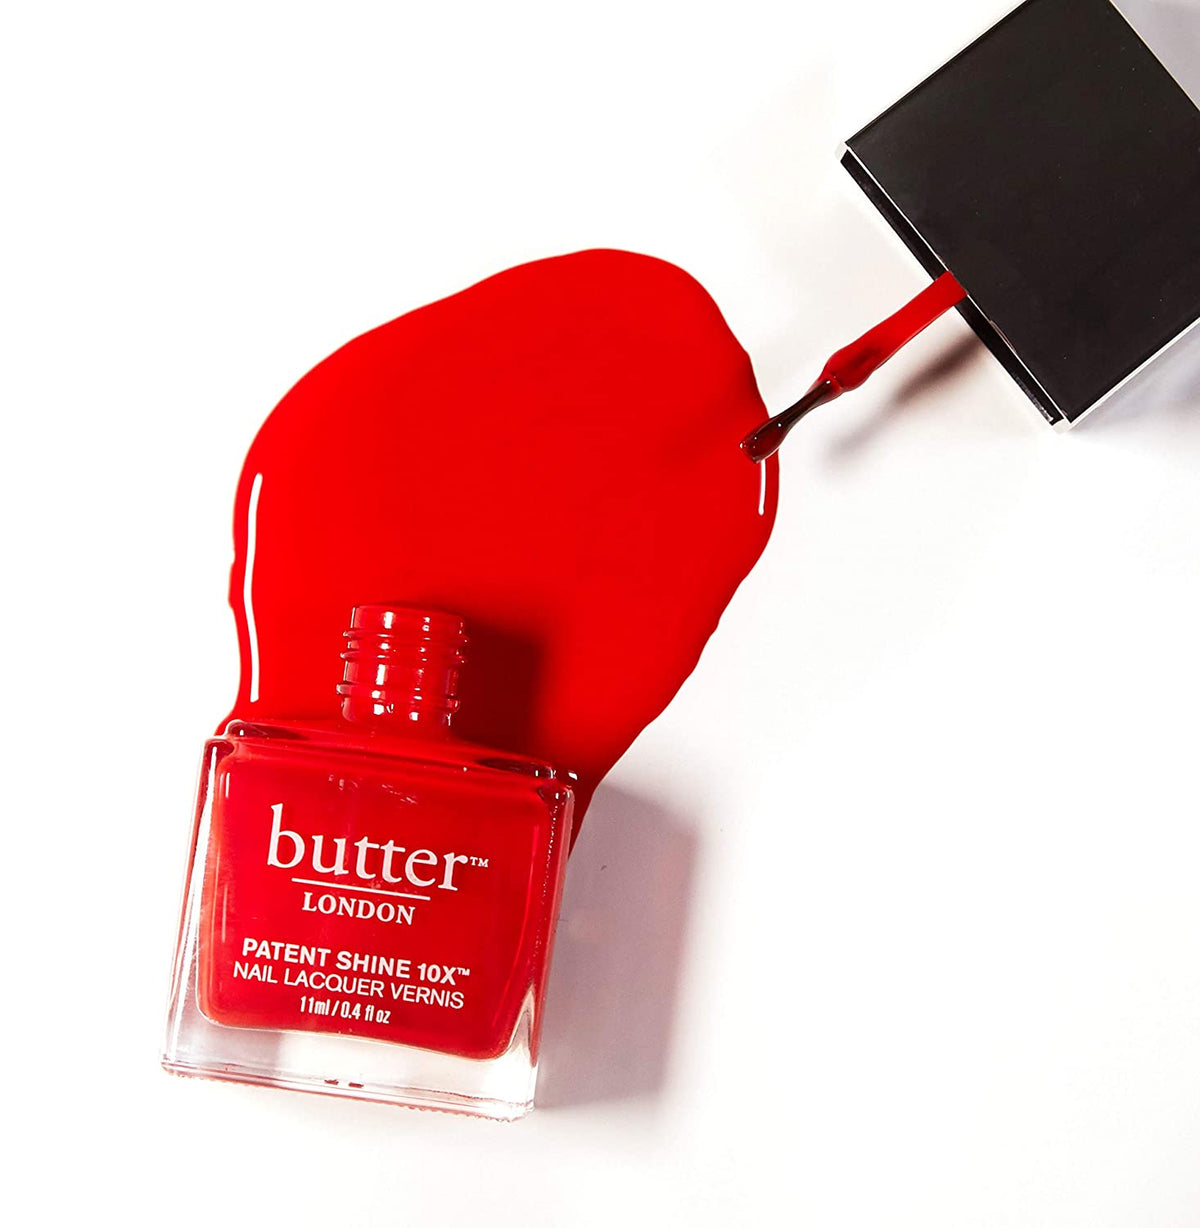 Smashing! - Patent Shine 10X Nail Lacquer NAILS - BUTTER LONDON - Luxe Pacifique